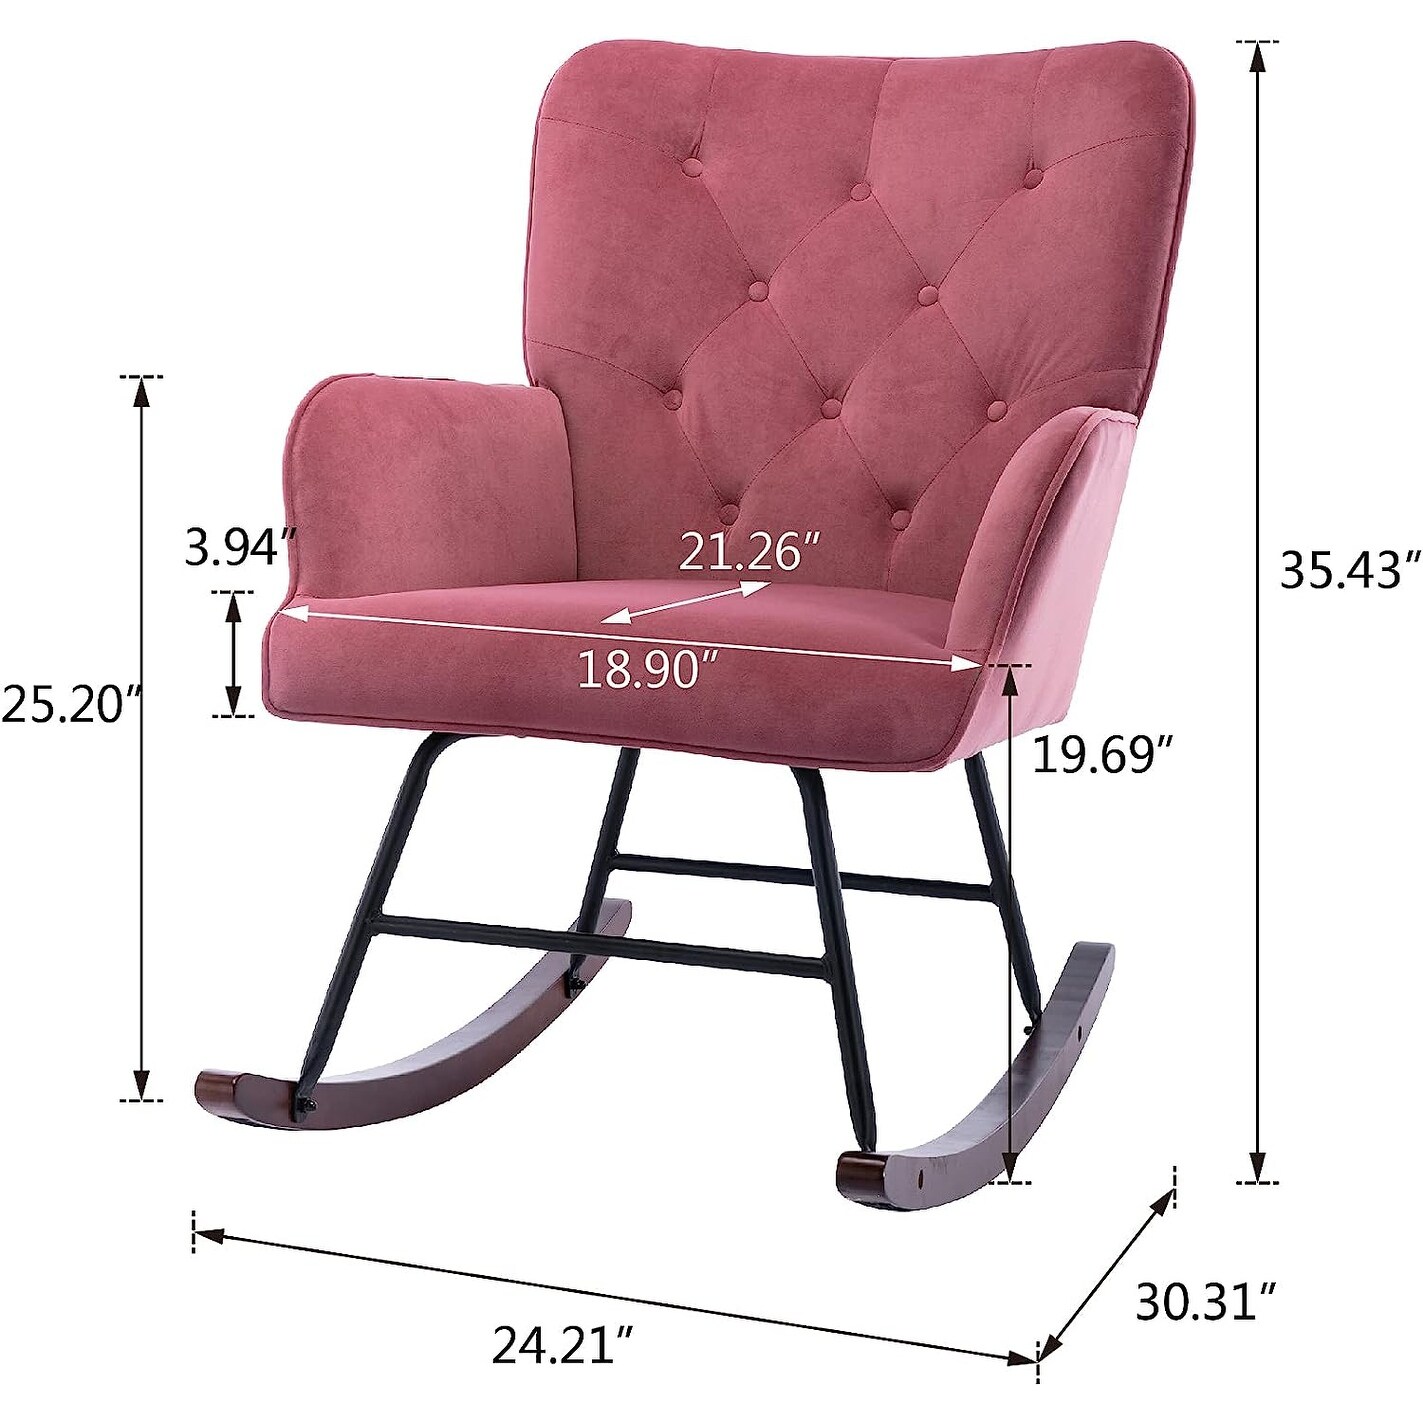 Modern Rocking Nursery Upholstered Rocker Chair with Buttons and Diamond-Shaped Cut Lines